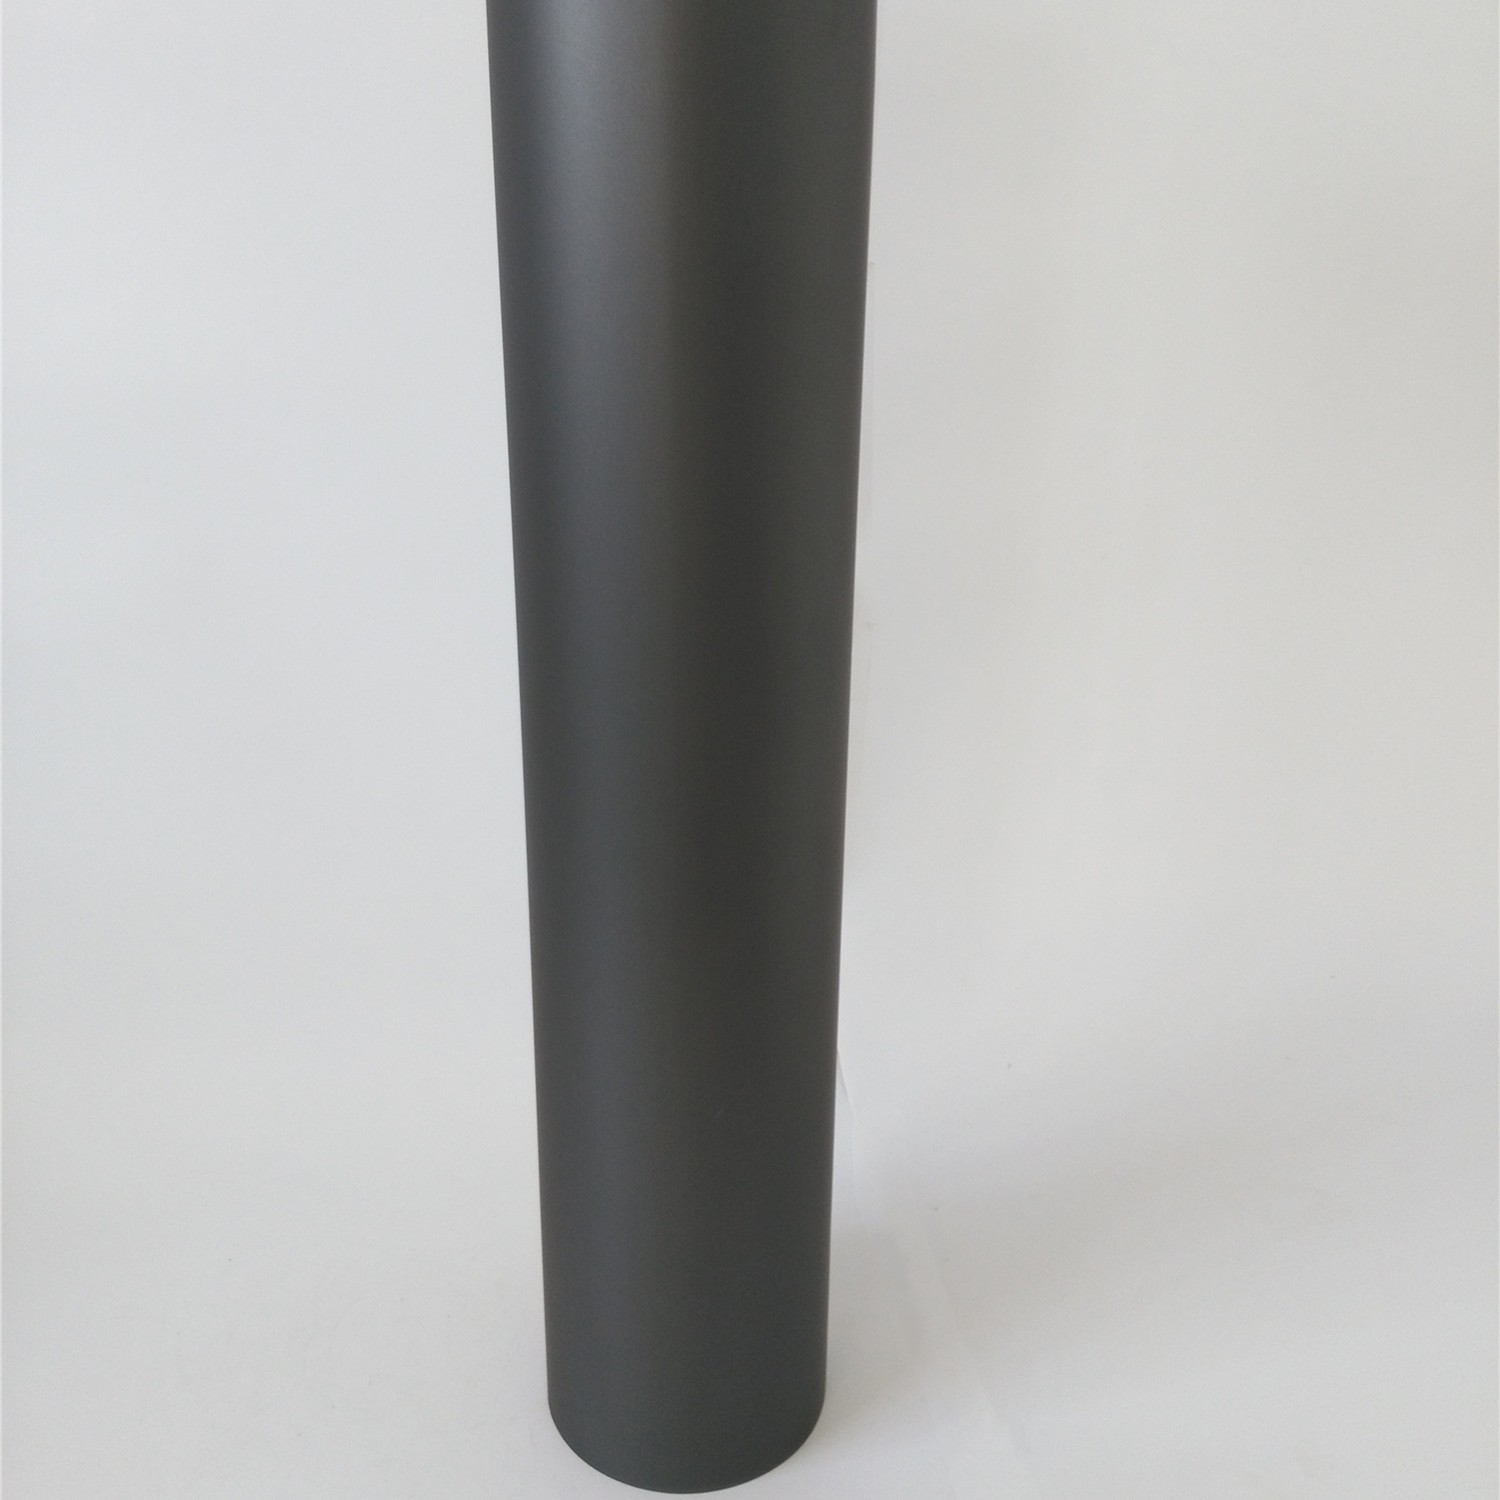 6 Inch Straight Single Wall Stainless Steel Flue Pipe Black Powder 6 Inch Stainless Steel Flue Pipe